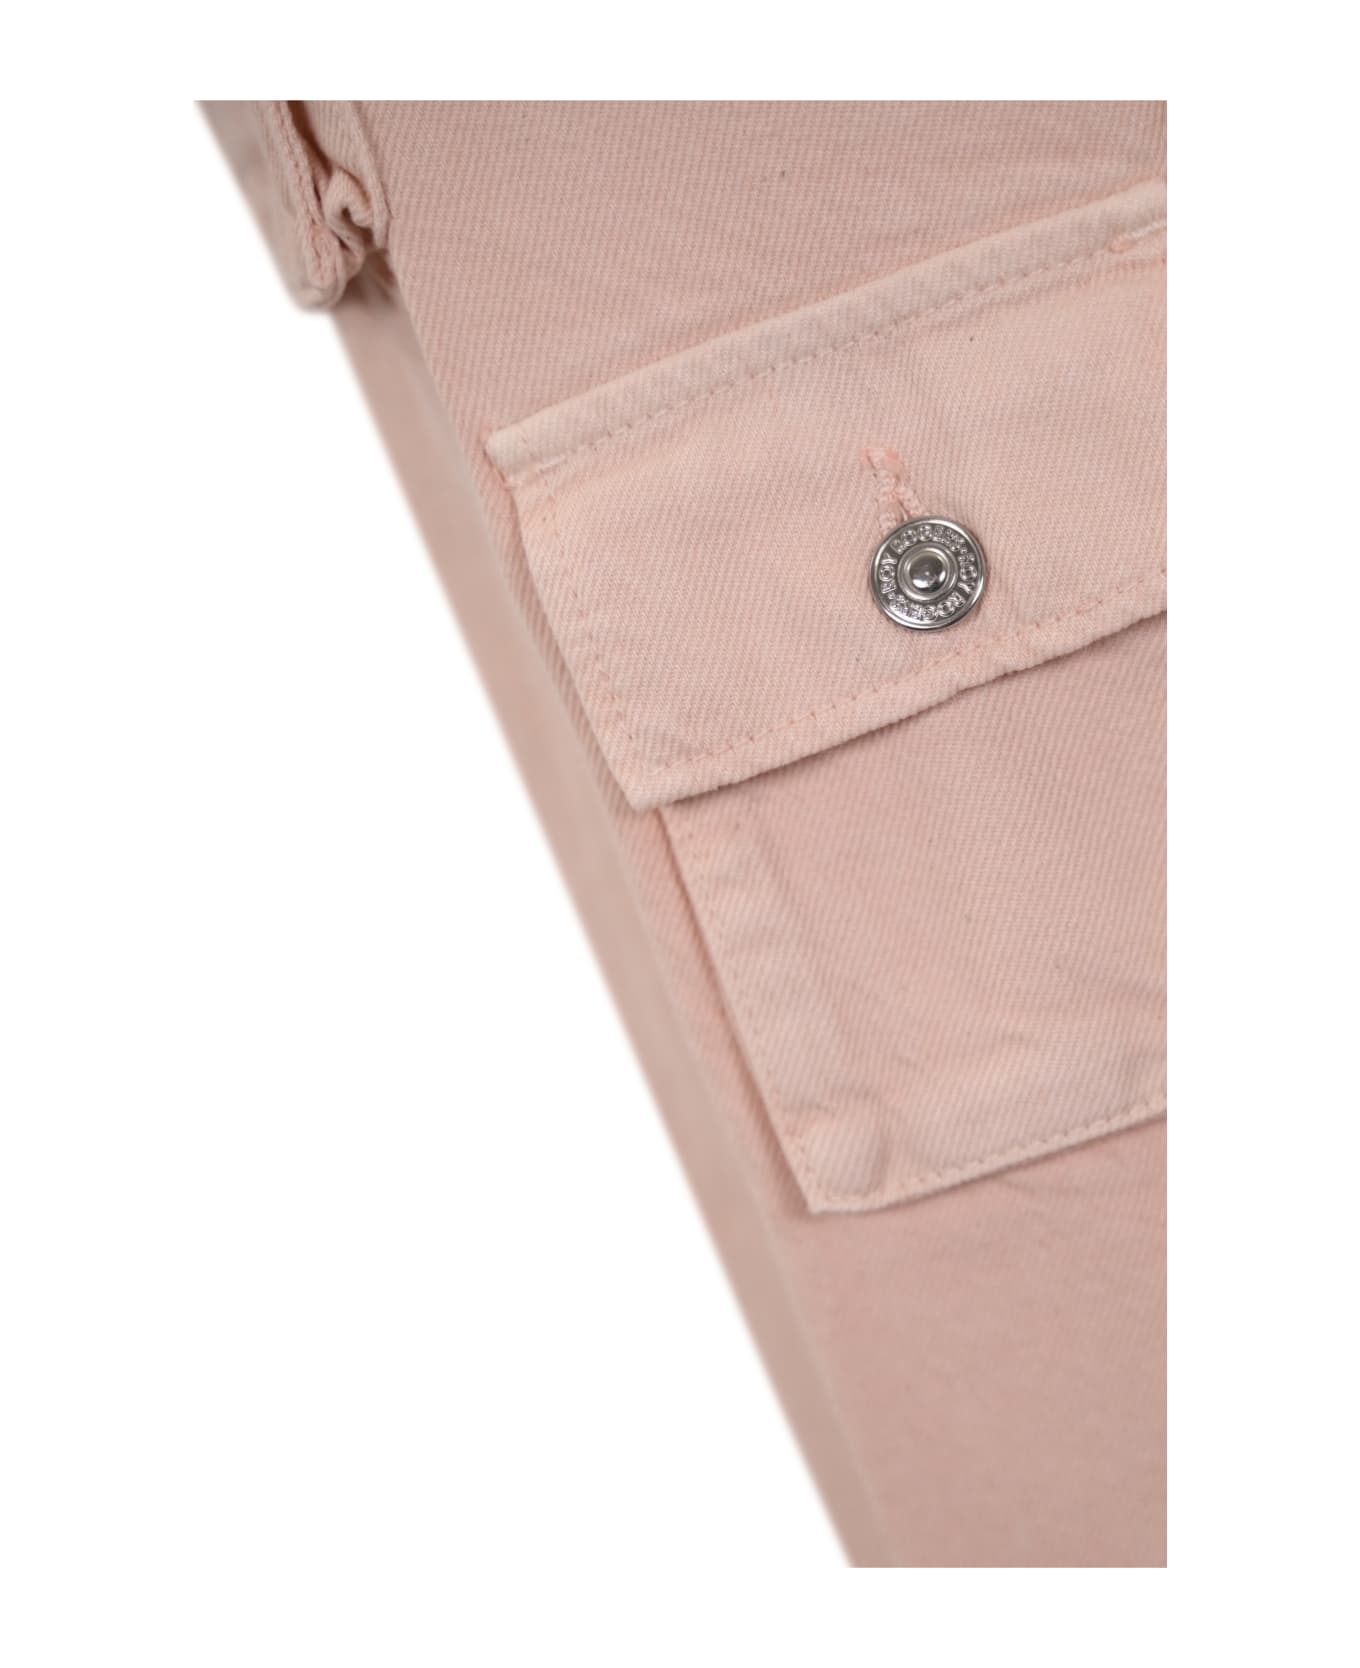 Roy Rogers Pink Cargo Jeans - Nude ボトムス